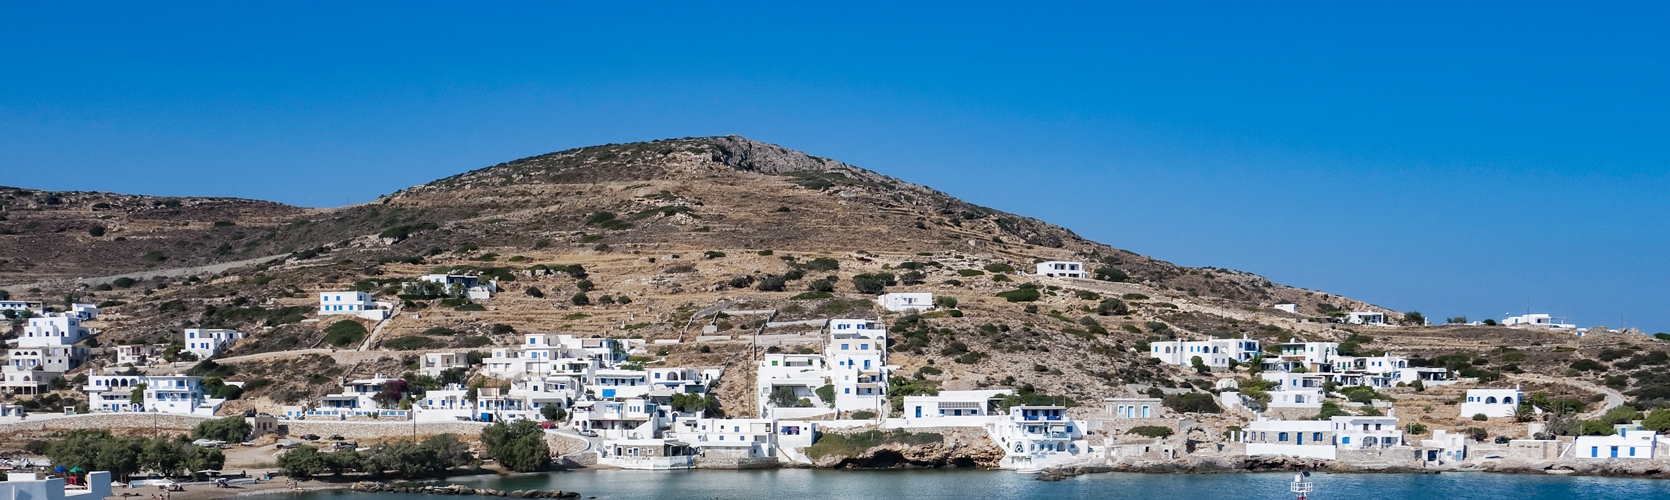 View of Sikinos from the coast